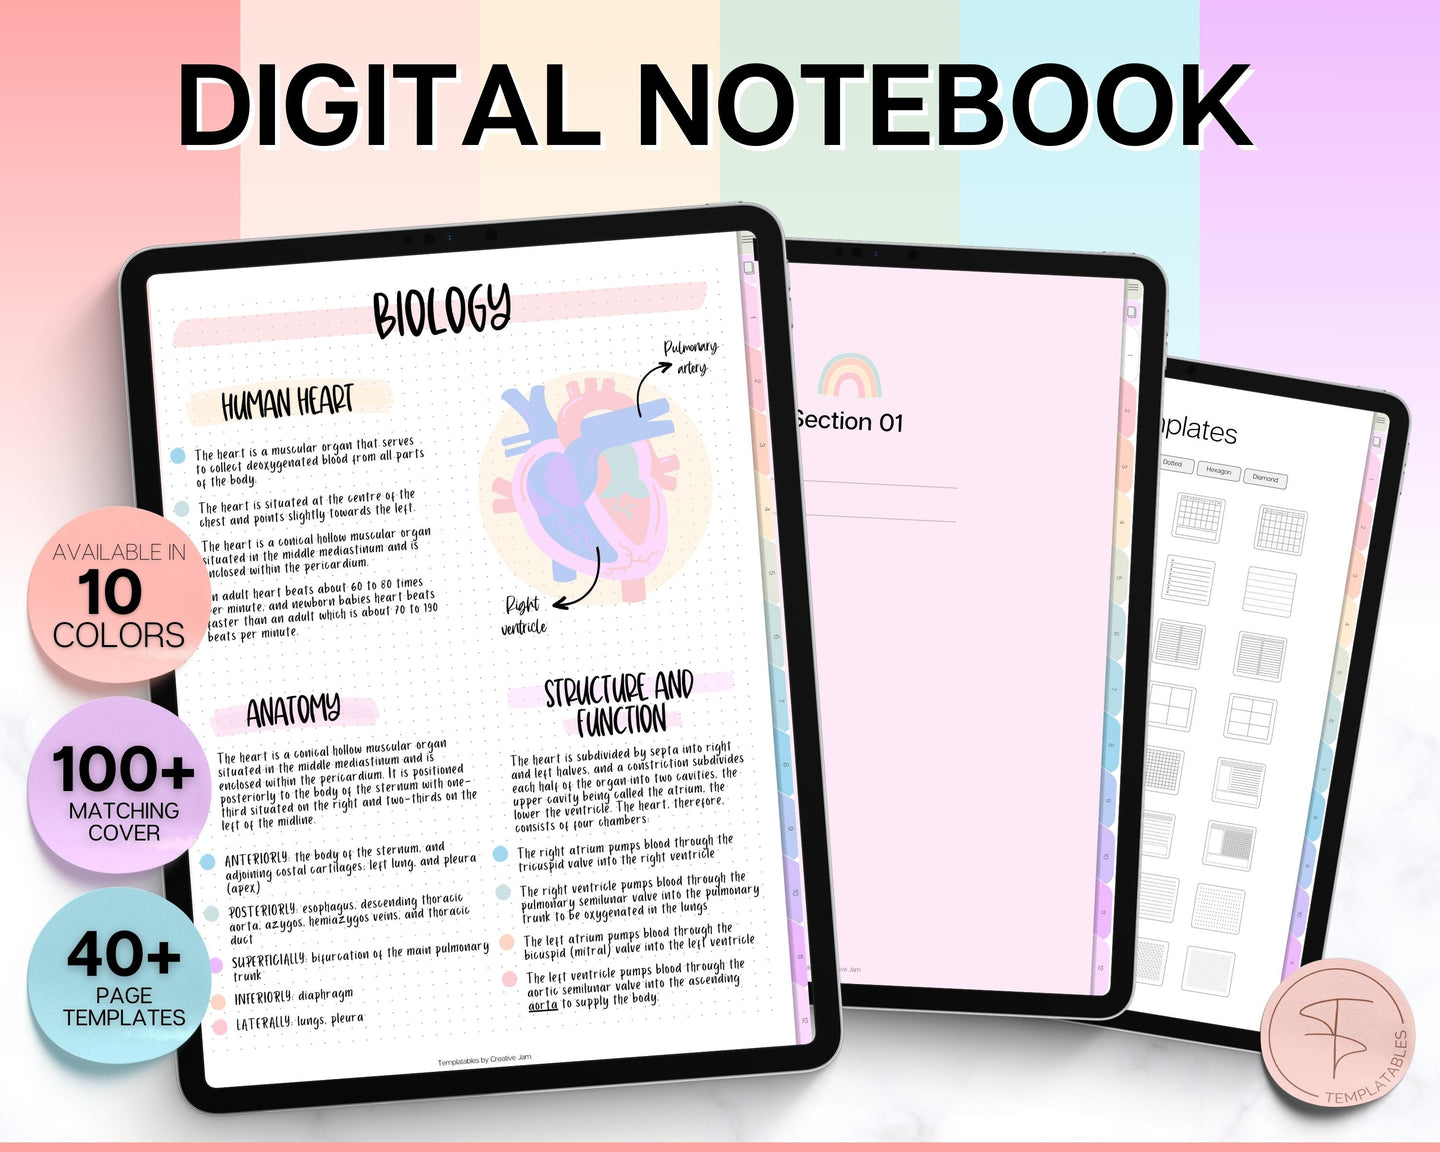 Digital Notebook | Hyperlinked Portrait Notebook with Aesthetic Covers and Note-Taking Templates for GoodNotes & iPad